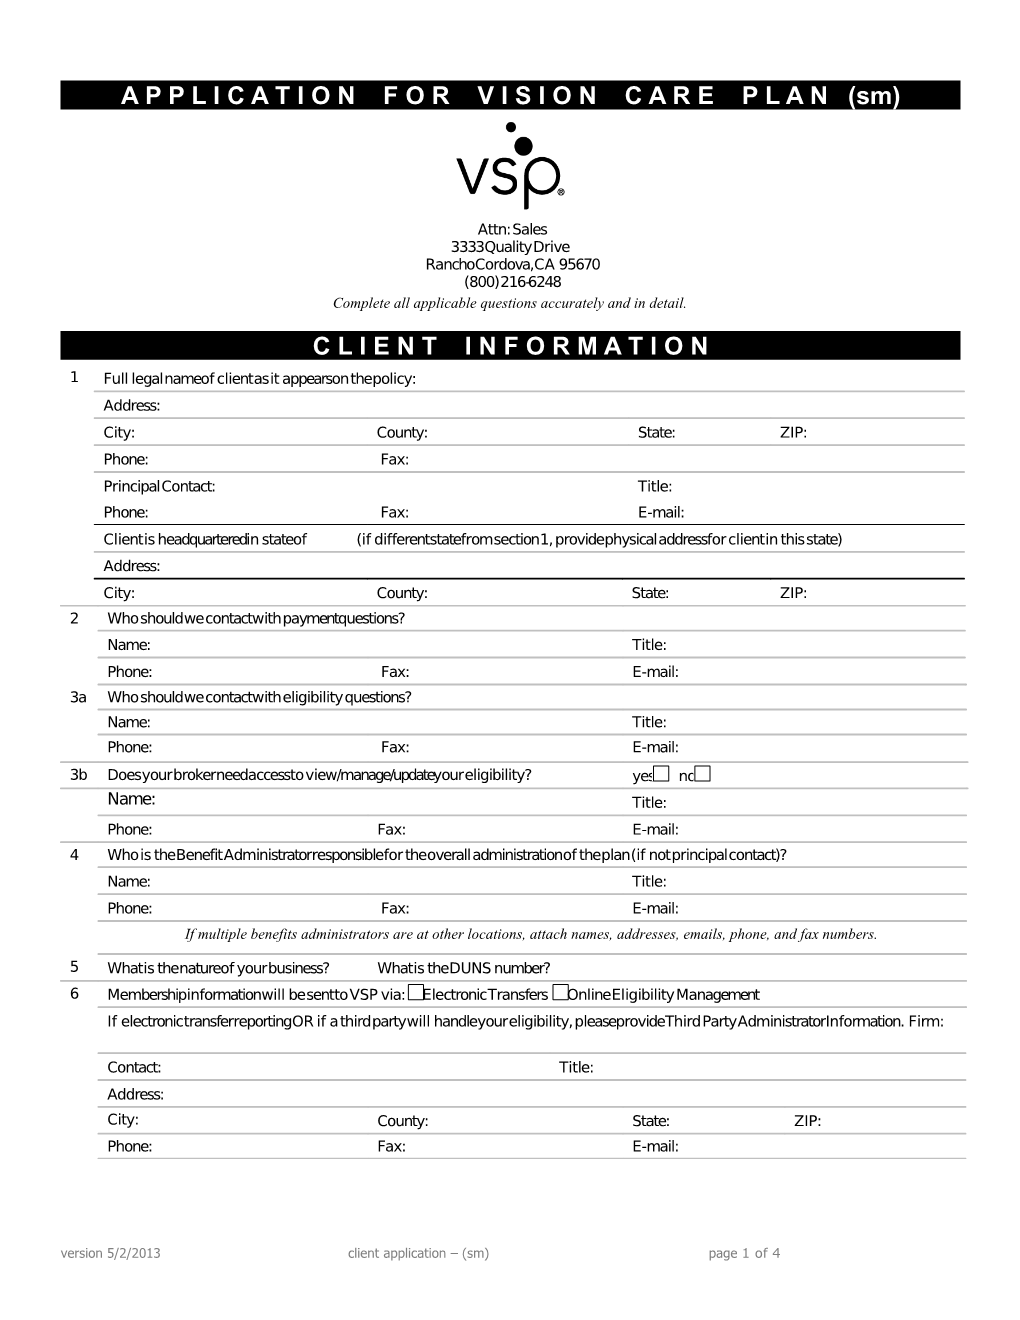 Application for Vision Care Plan